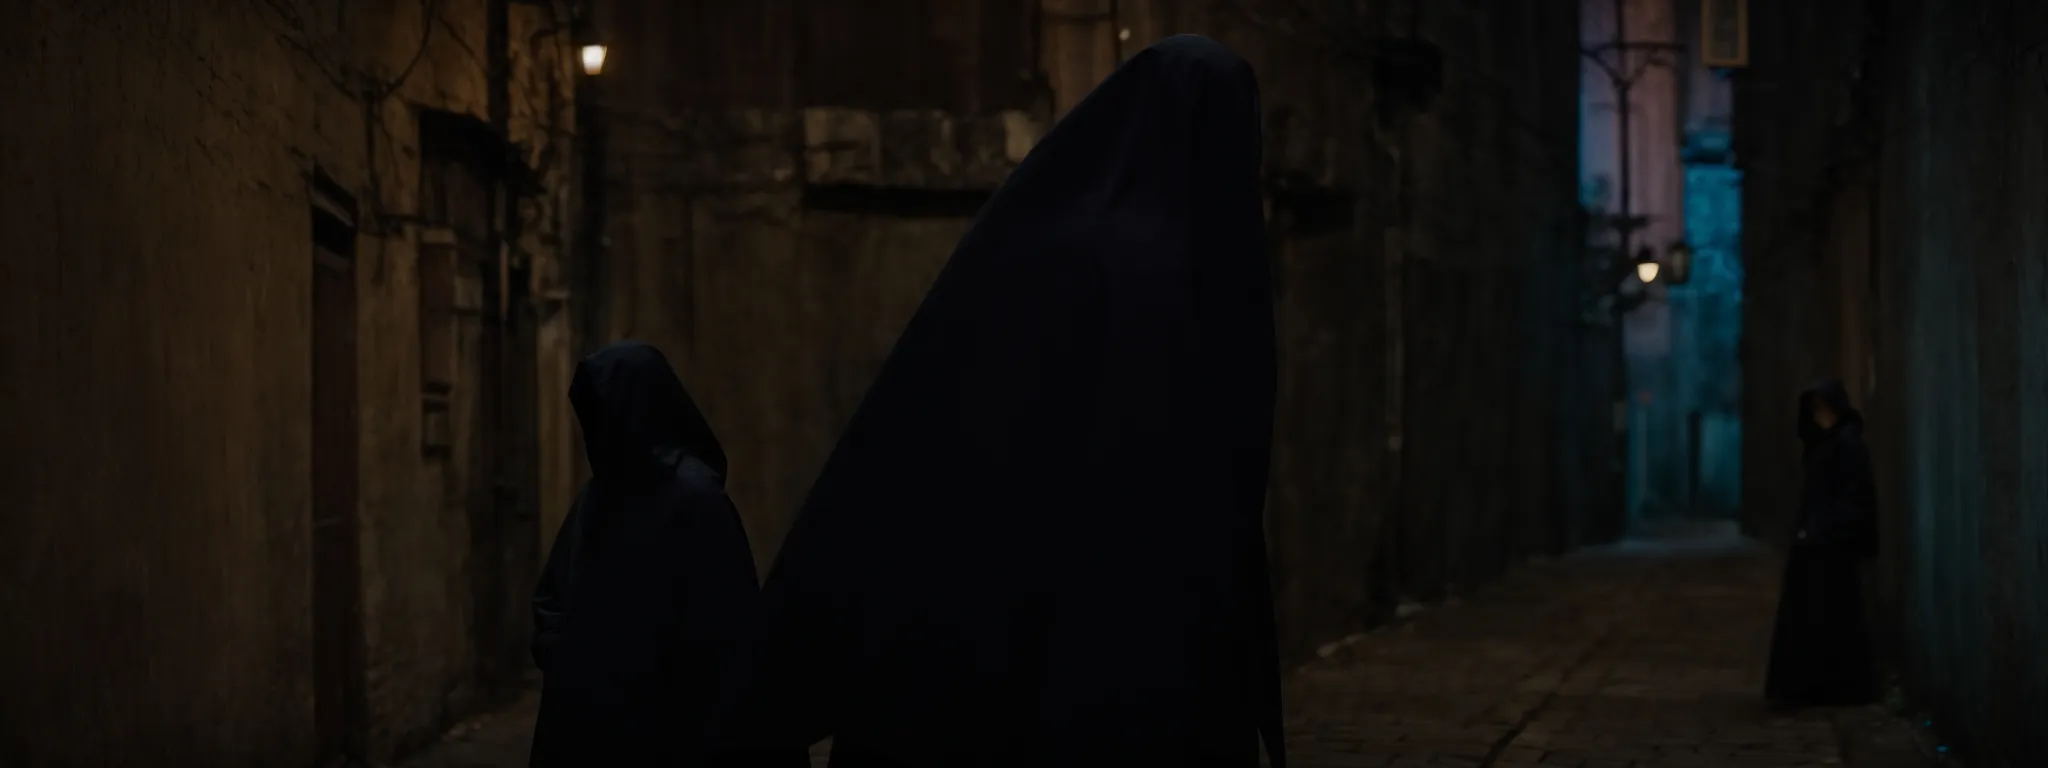 a dimly lit alleyway with a single figure cloaked in a hooded garment, subtly glancing over a shoulder.